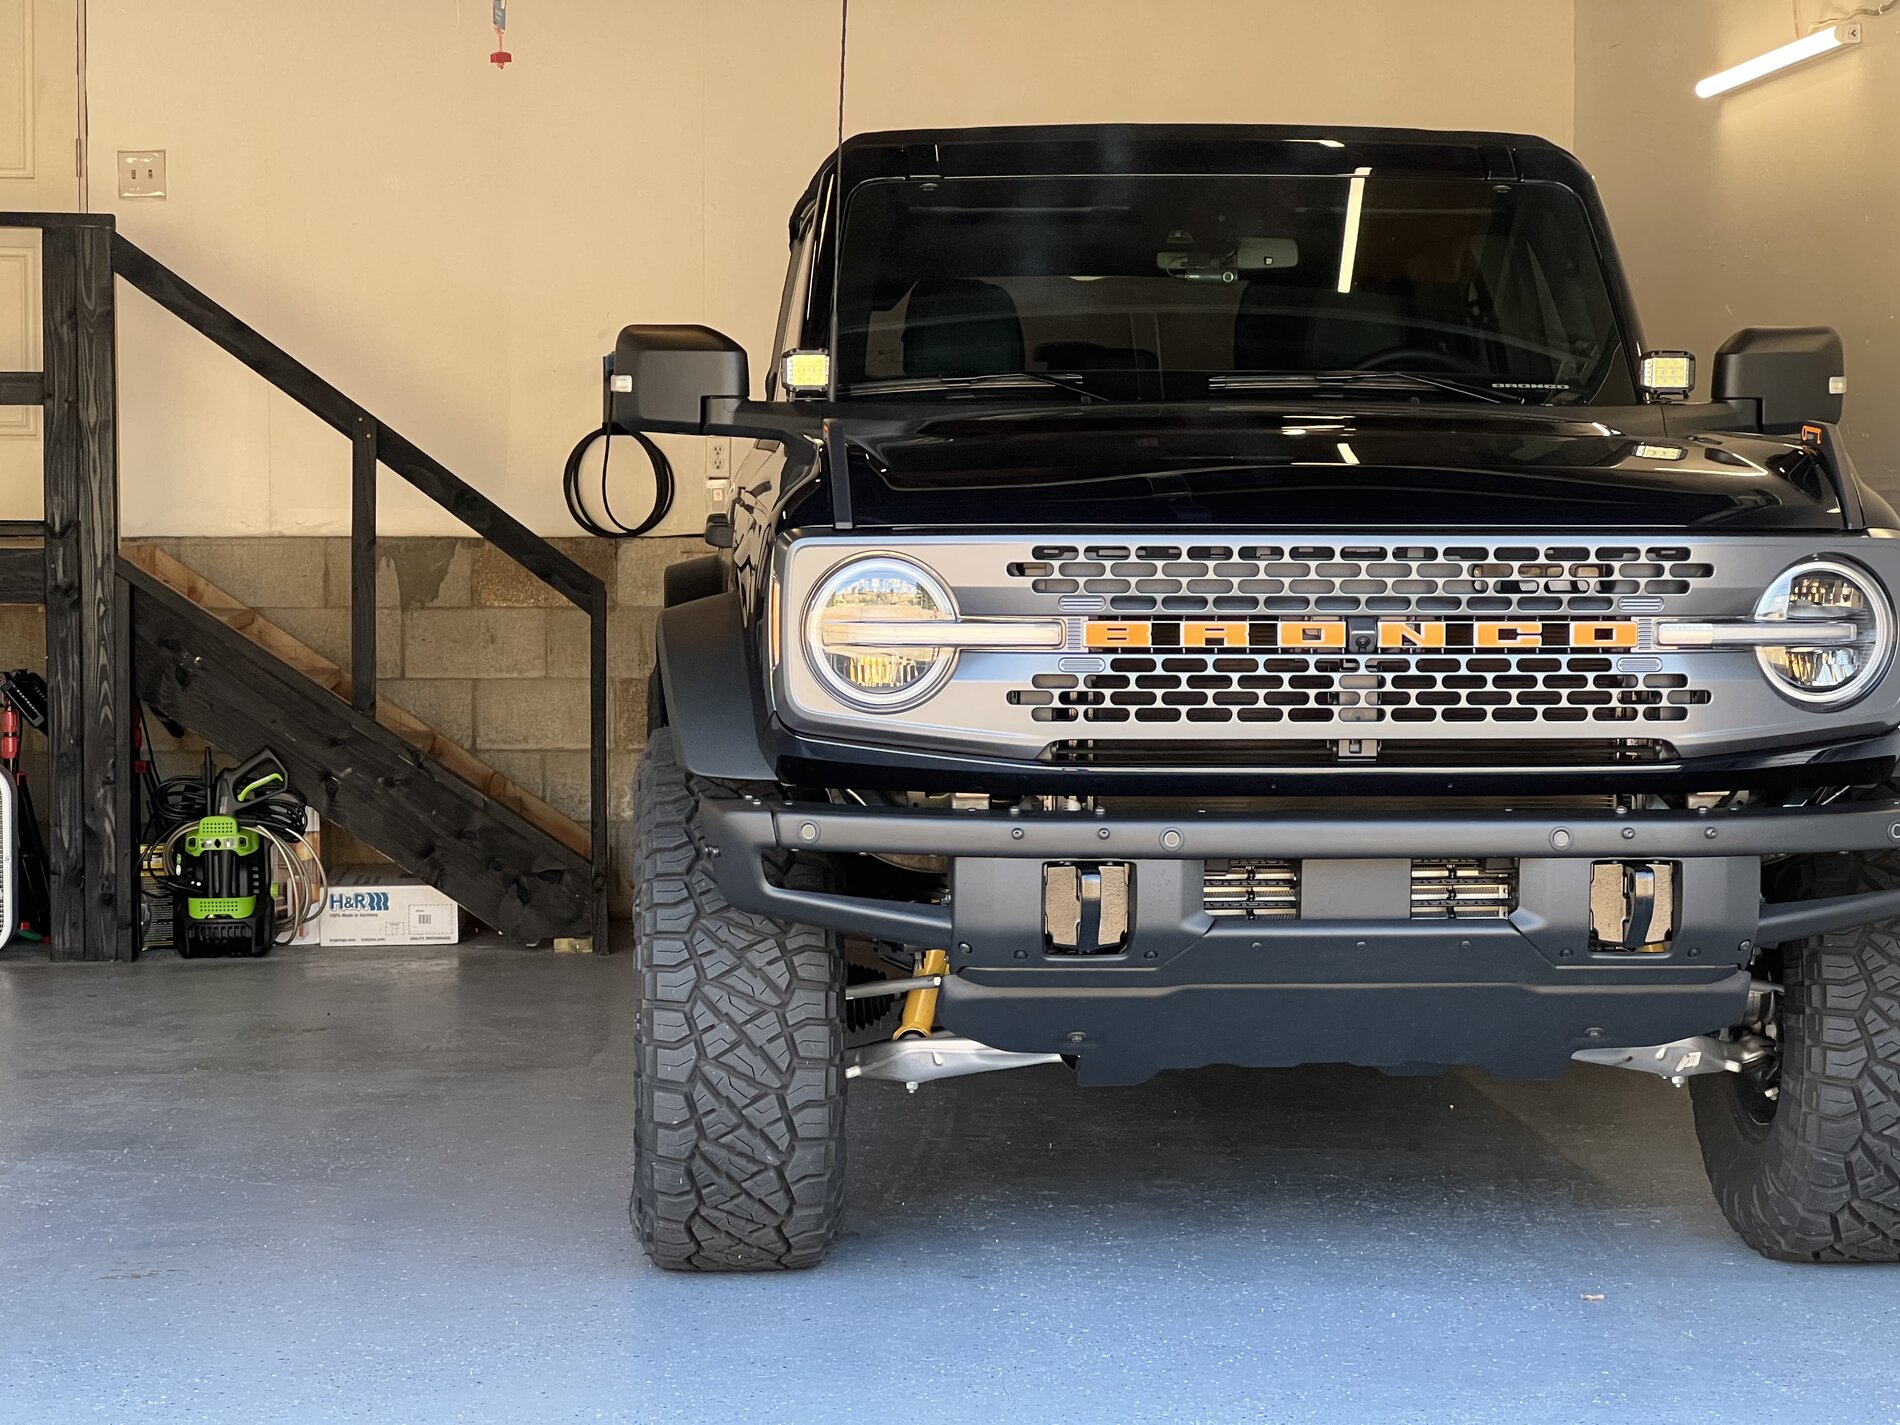 Ford Bronco Sasquatch fender flares before and after 3C3829E6-886D-4A55-A2AF-D897B5AB27C7